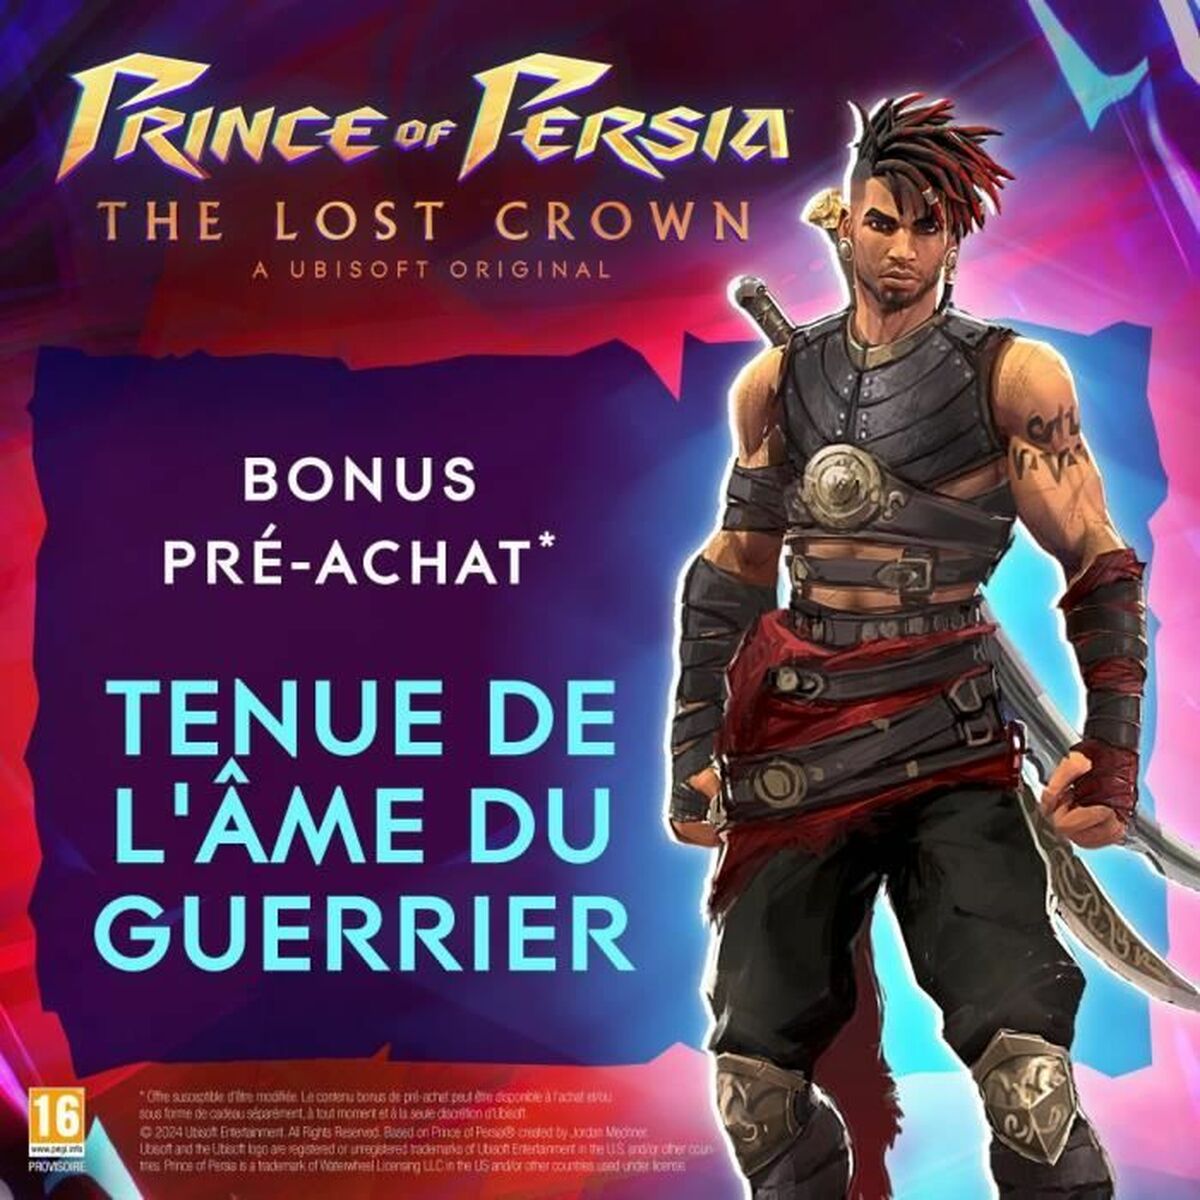 Videospēle Xbox One / Series X Ubisoft Prince of Persia: The Lost Crown